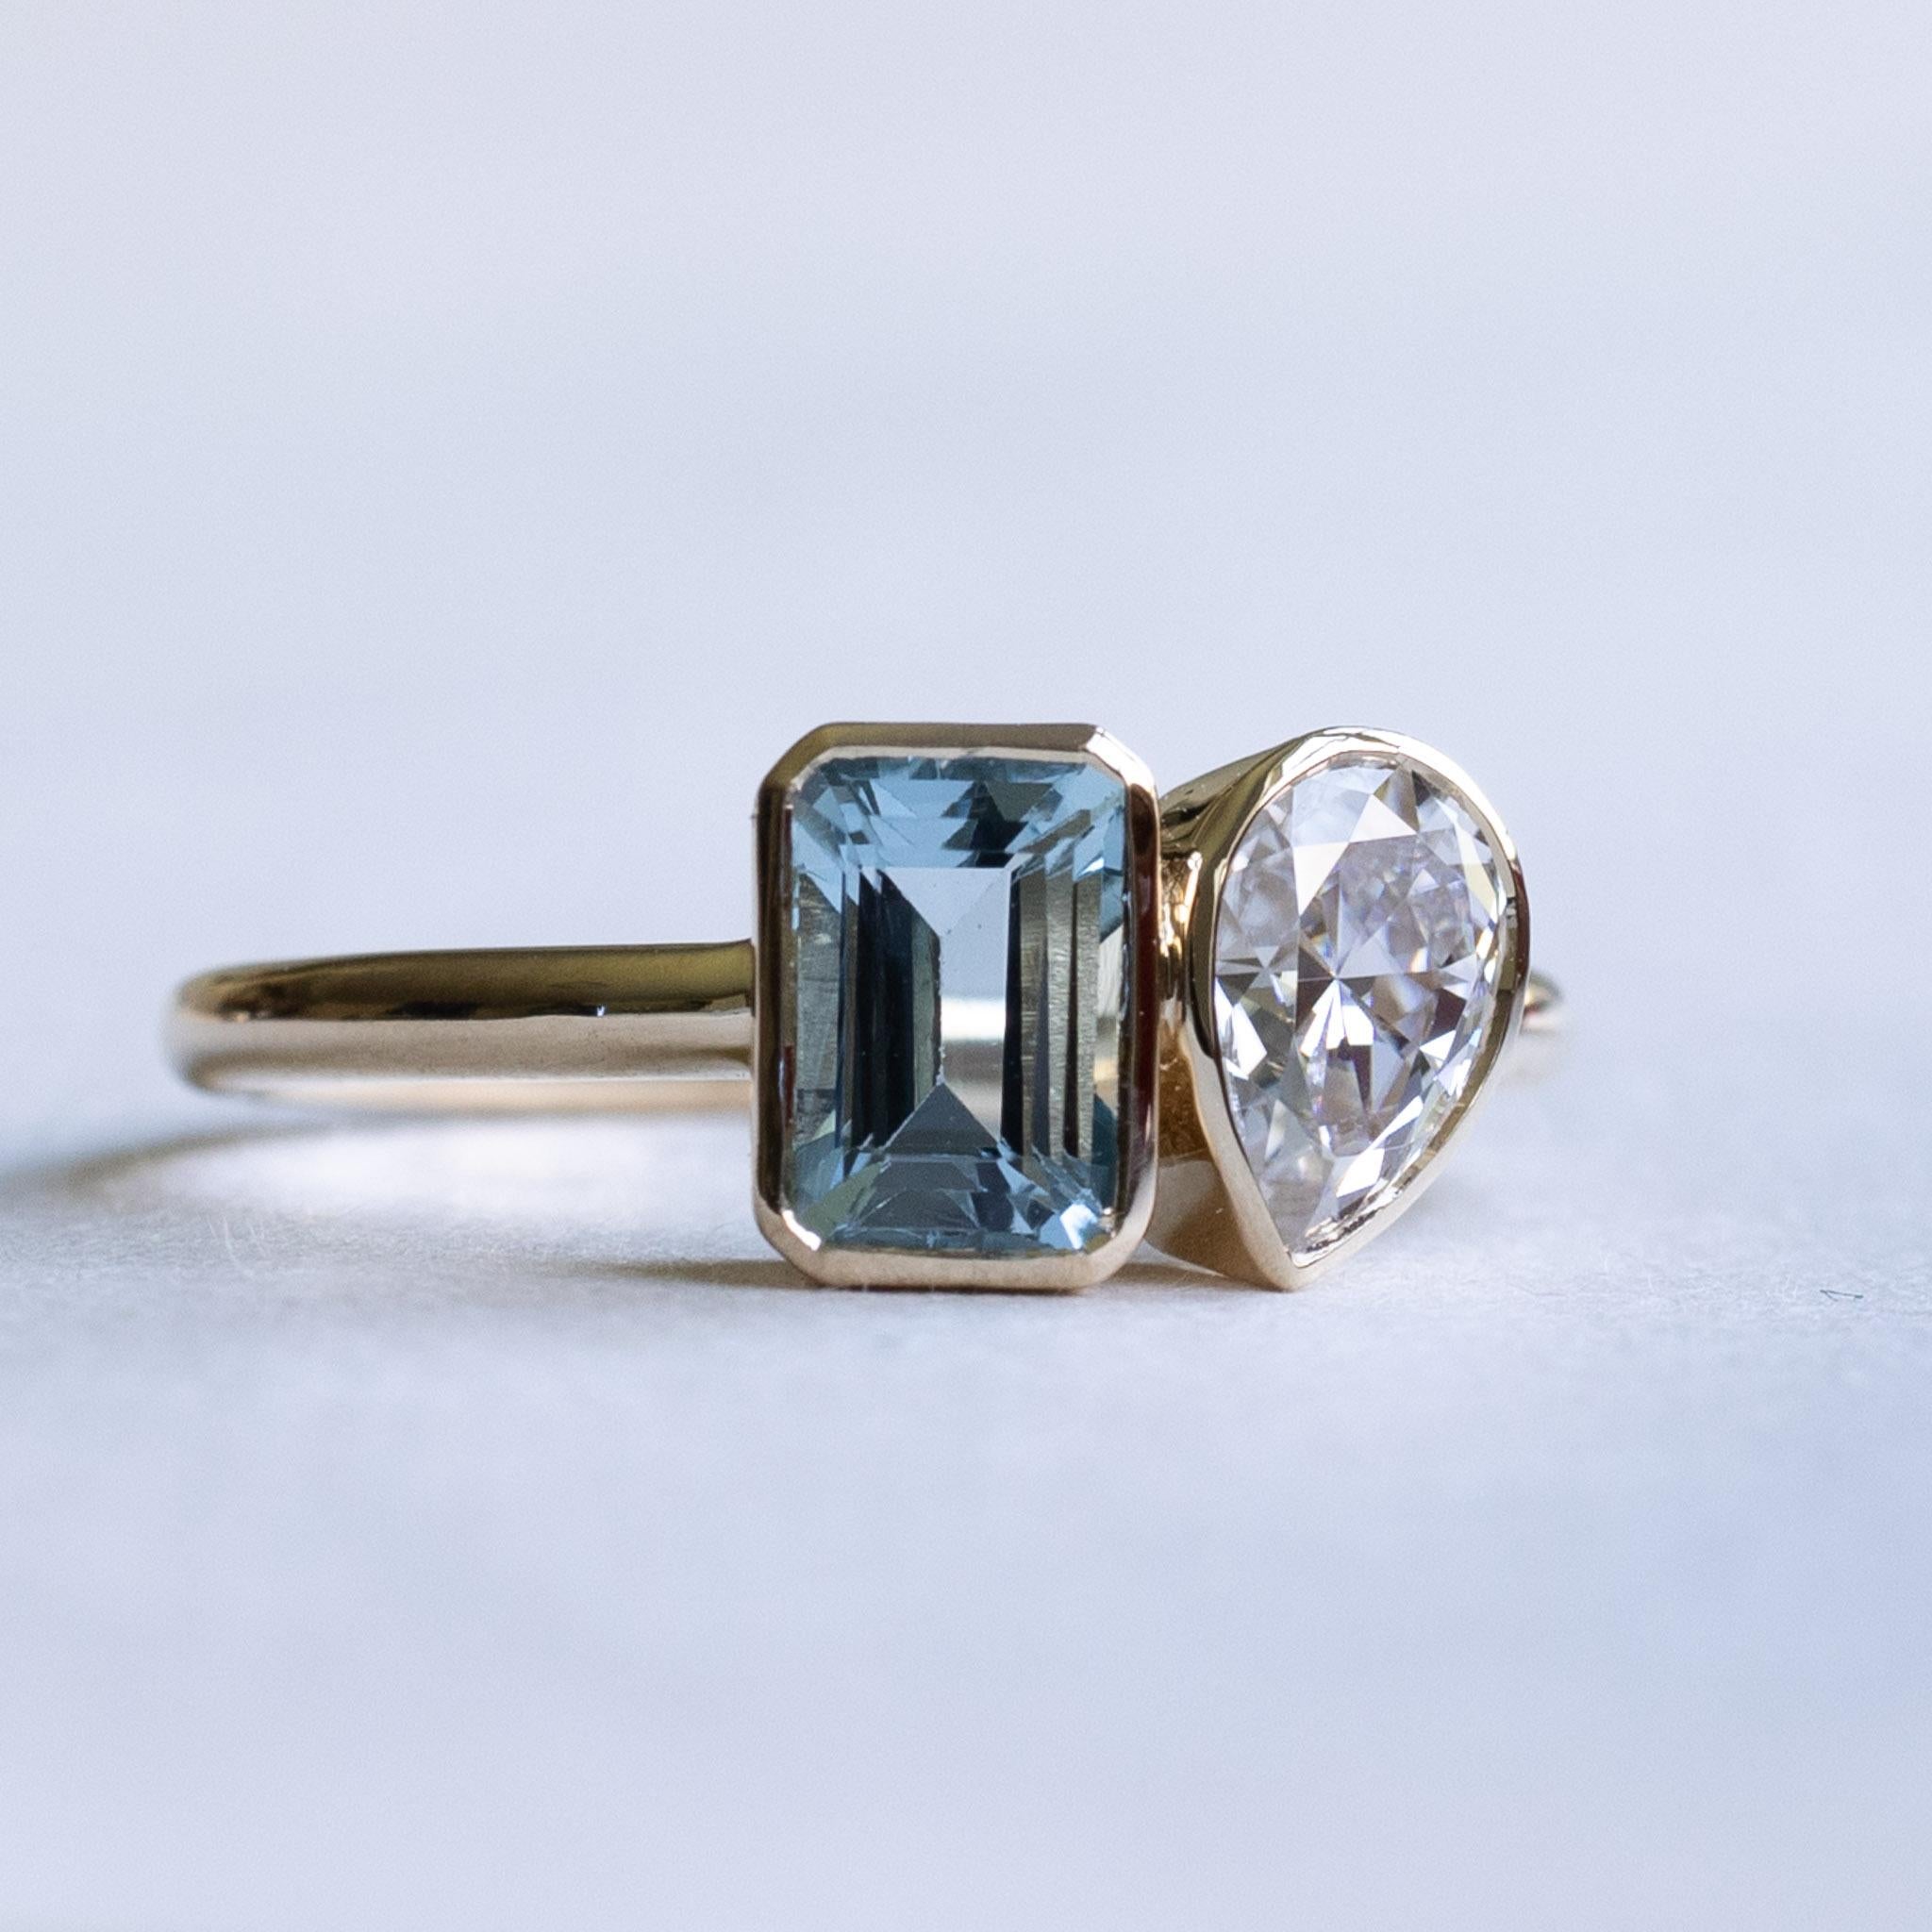 Emerald cut aquamarine with pear moissanite on this you and me ring.

Metal: 14k Gold
Stone 1: Aquamarine
Stone Shape: Emerald cut
Stone Size:  5mm x 7mm
Stone 2: Moissanite
Stone Shape: Pear
Stone Size: 5mm x 7mm
Color: DEF
Forever One Charles and